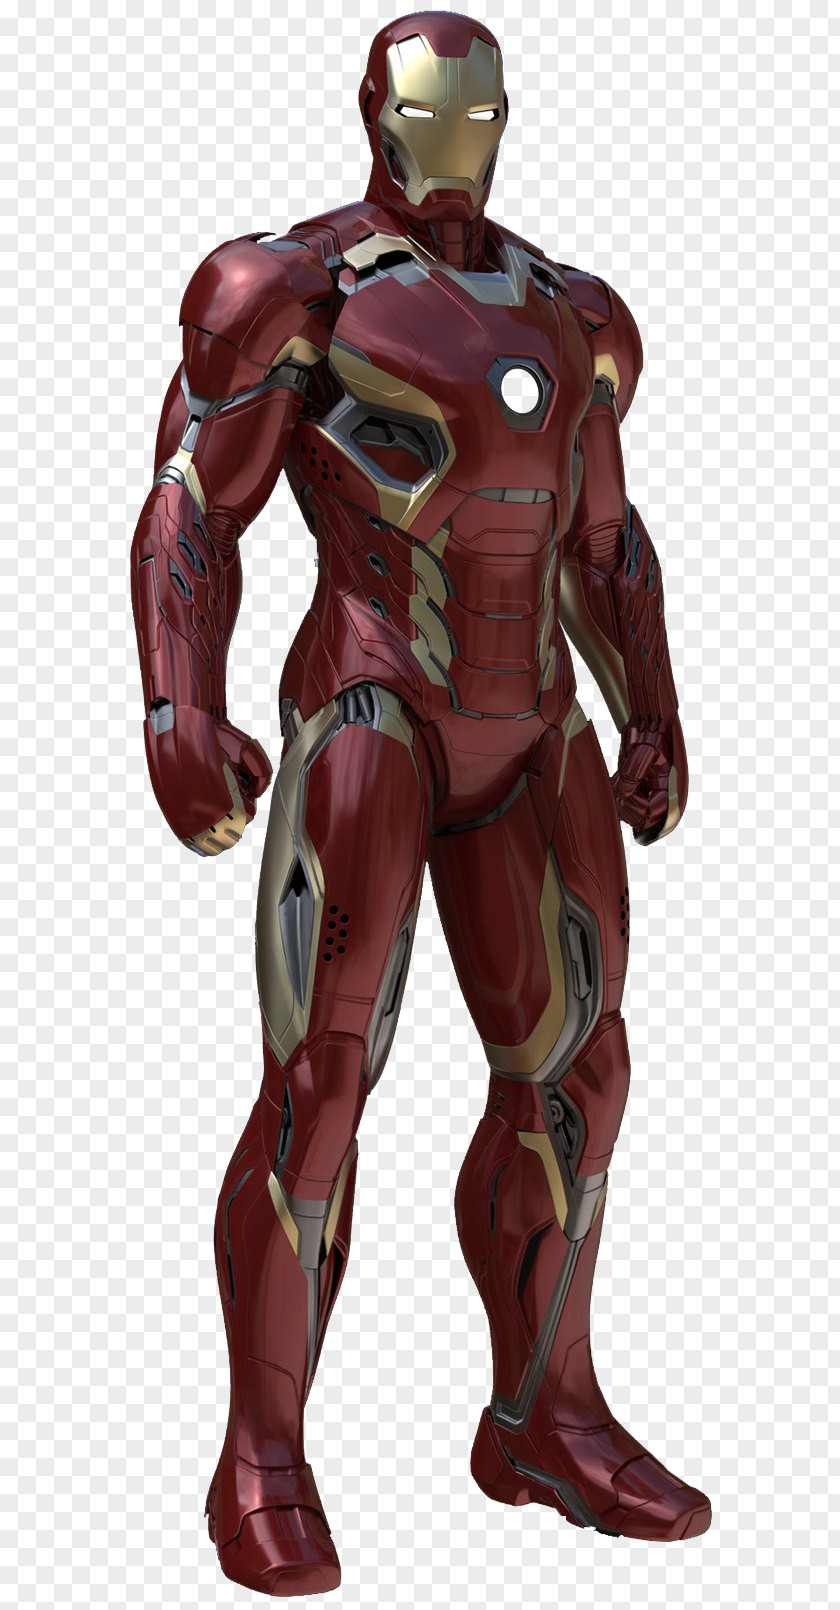 Iron Man Model Edwin Jarvis Howard Stark Extremis Vision PNG